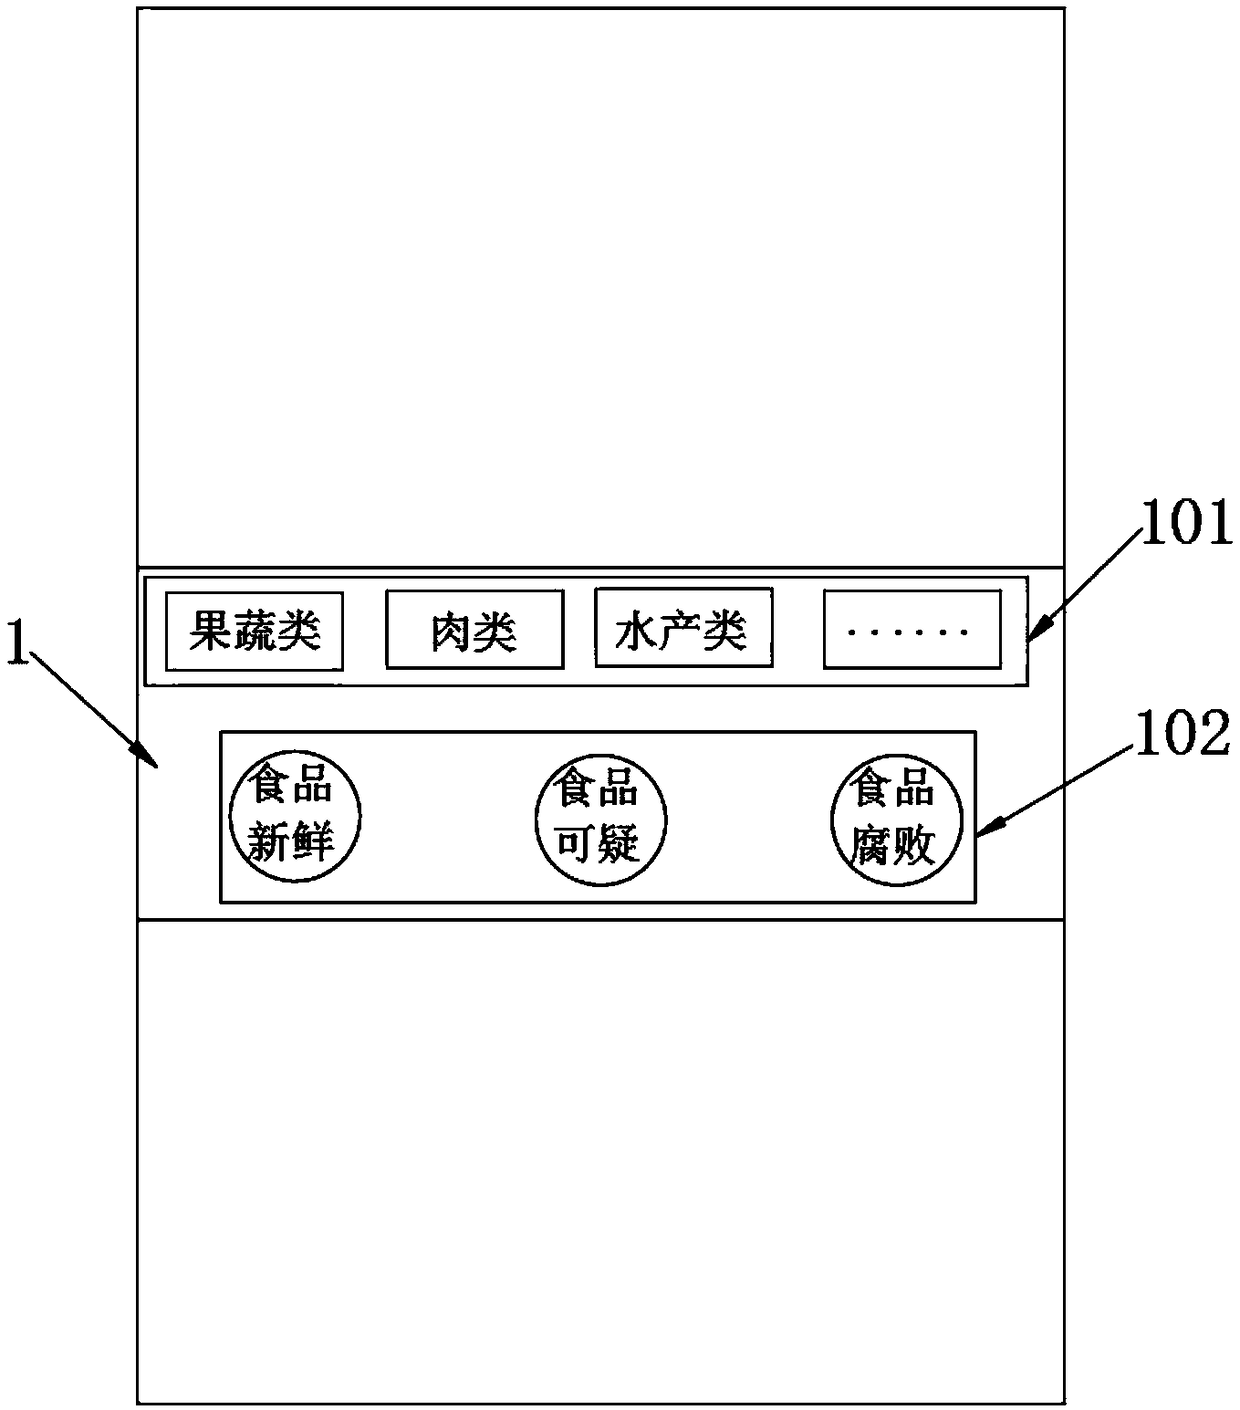 Refrigerator and method for detecting food freshness